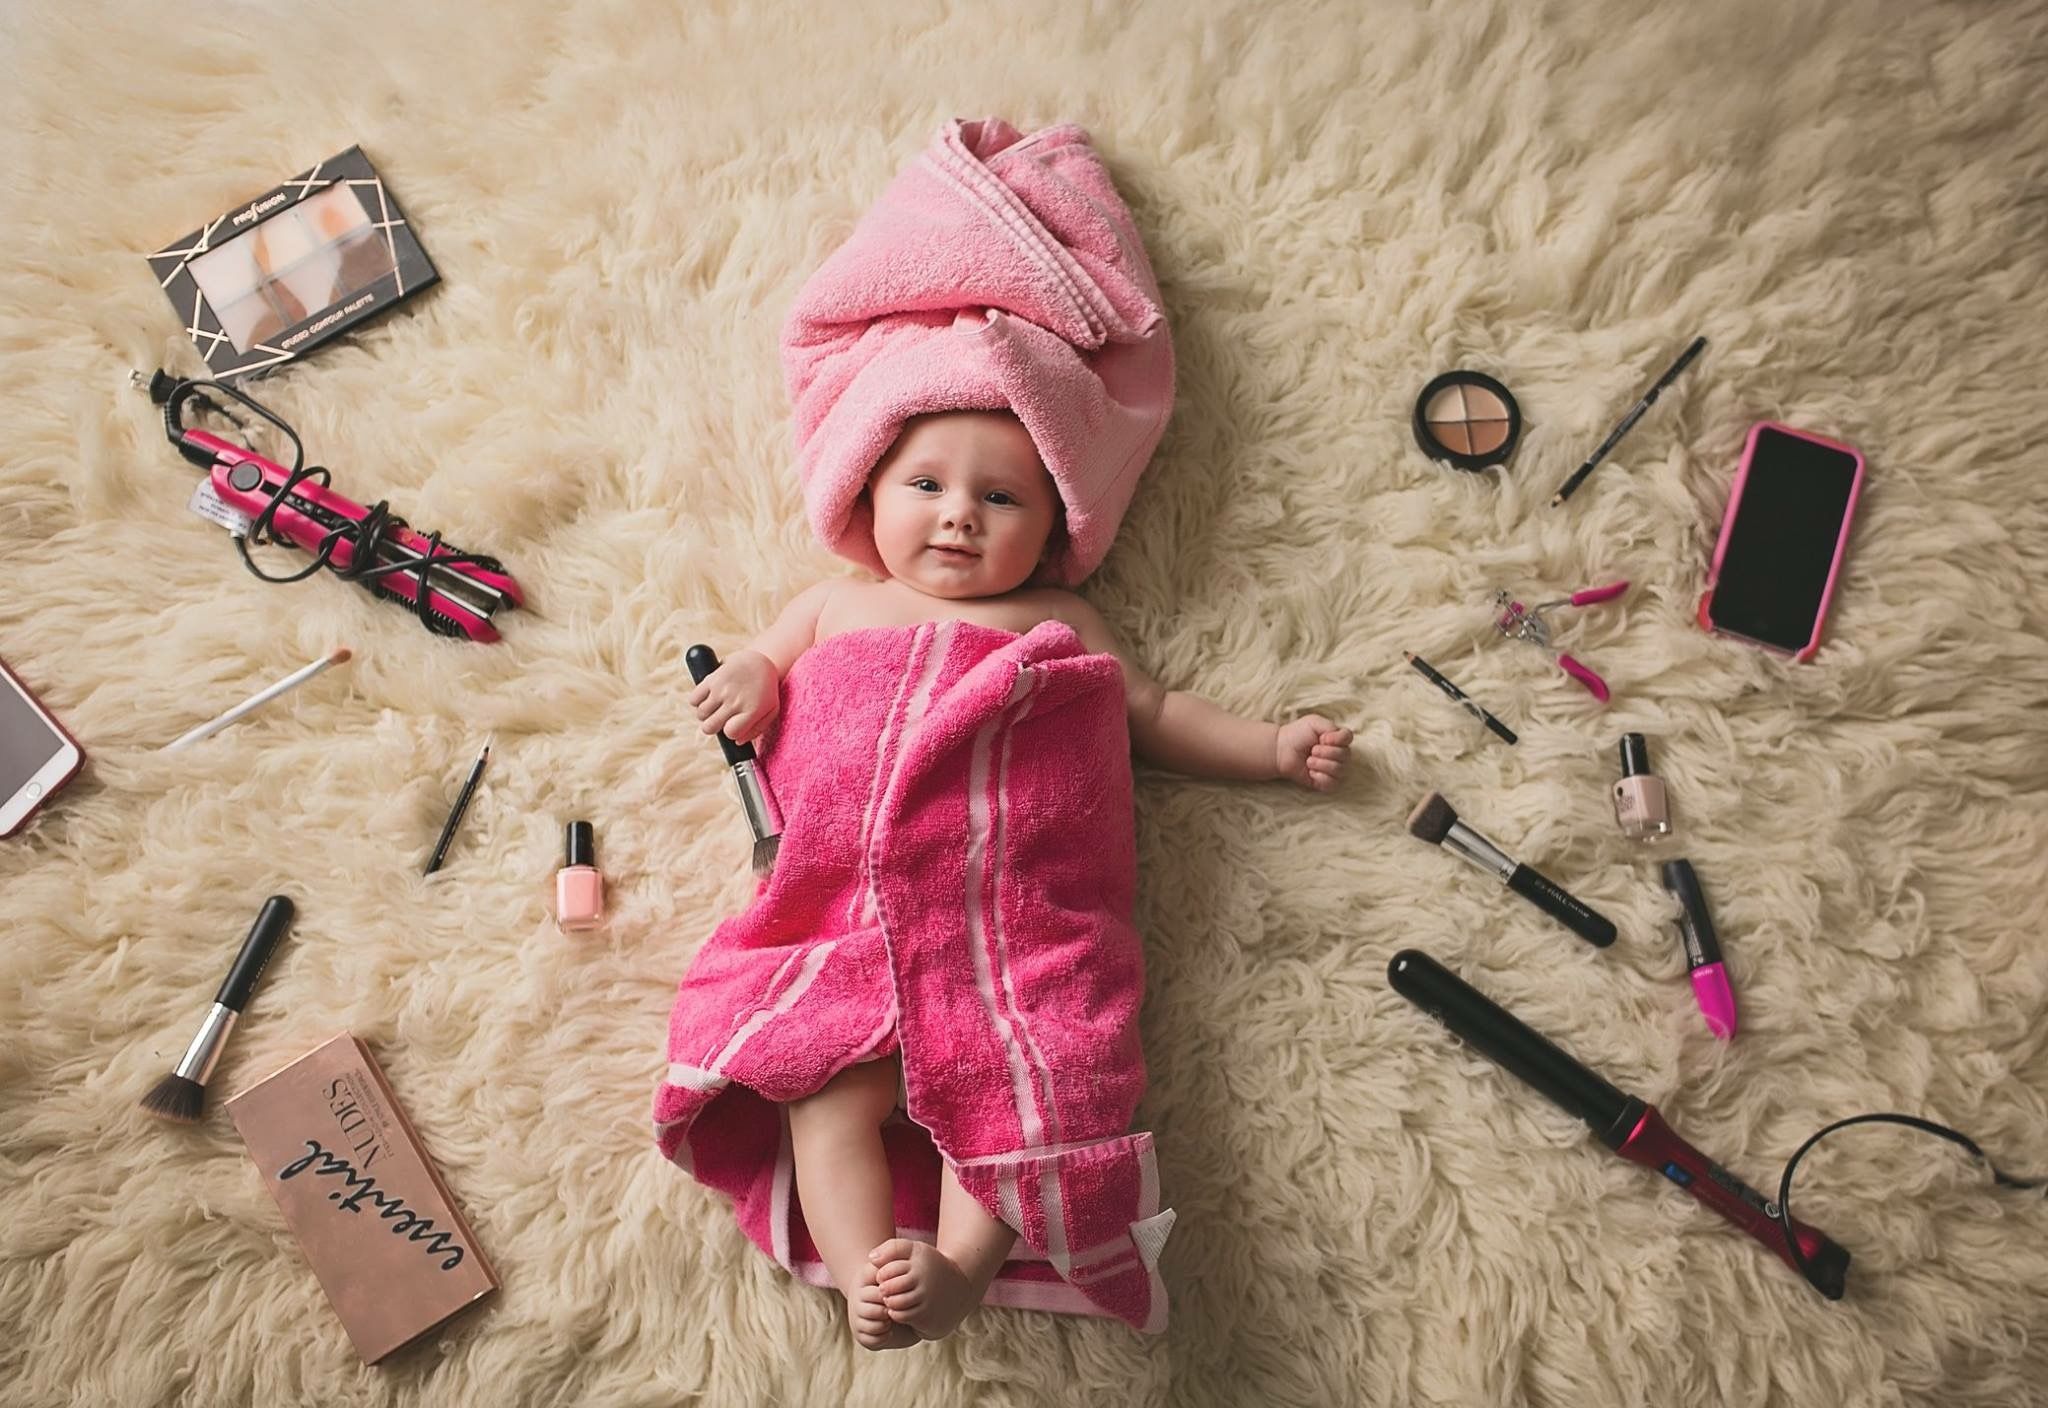 4 month baby girl pink make up towels photography ideas | Baby girl ...